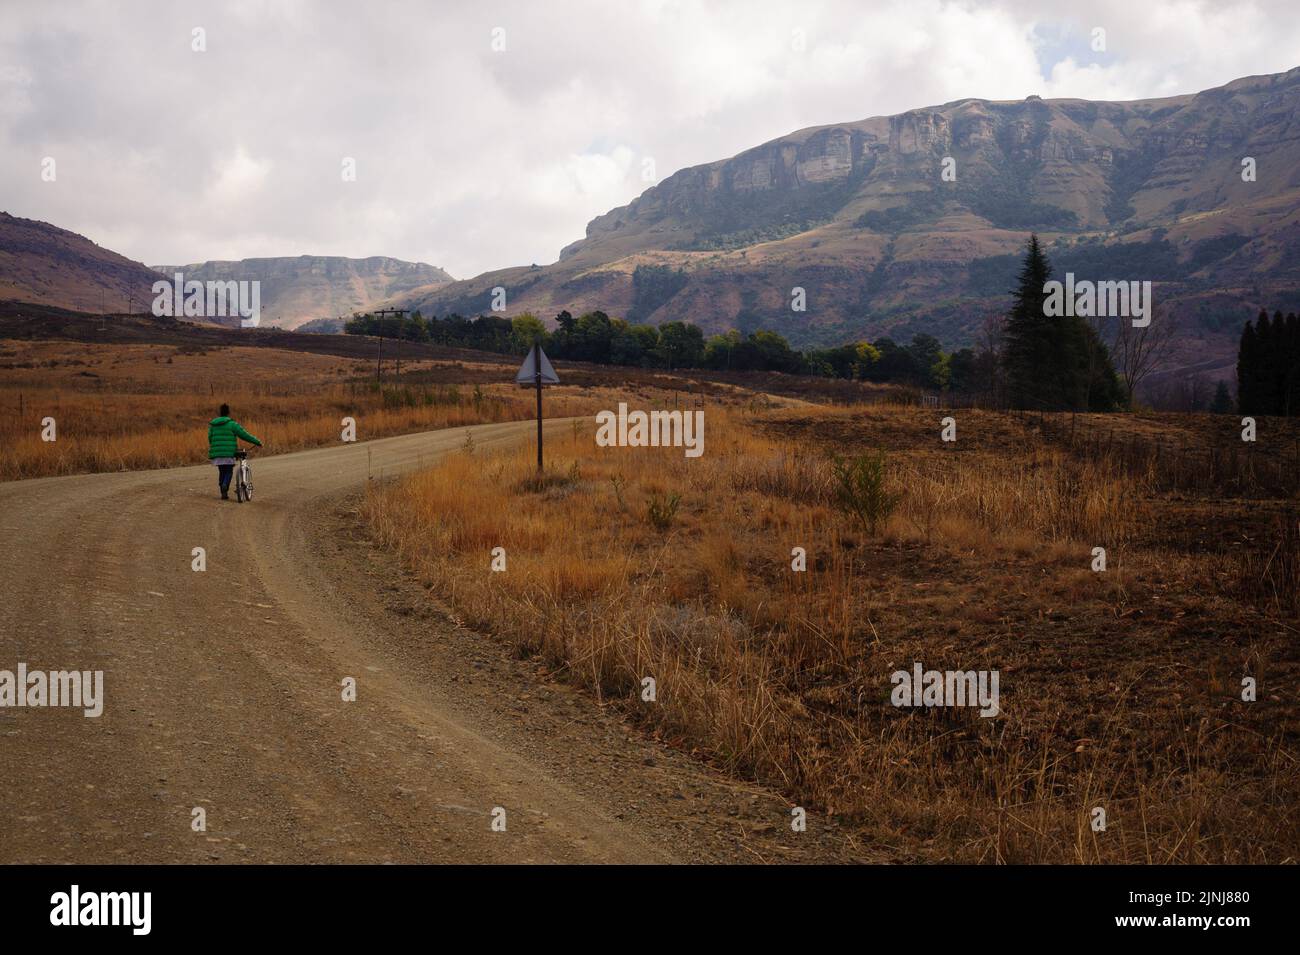 Cycling through the Kamberg Valley's dirt roads in South Africa's Drakensberg mountains Stock Photo